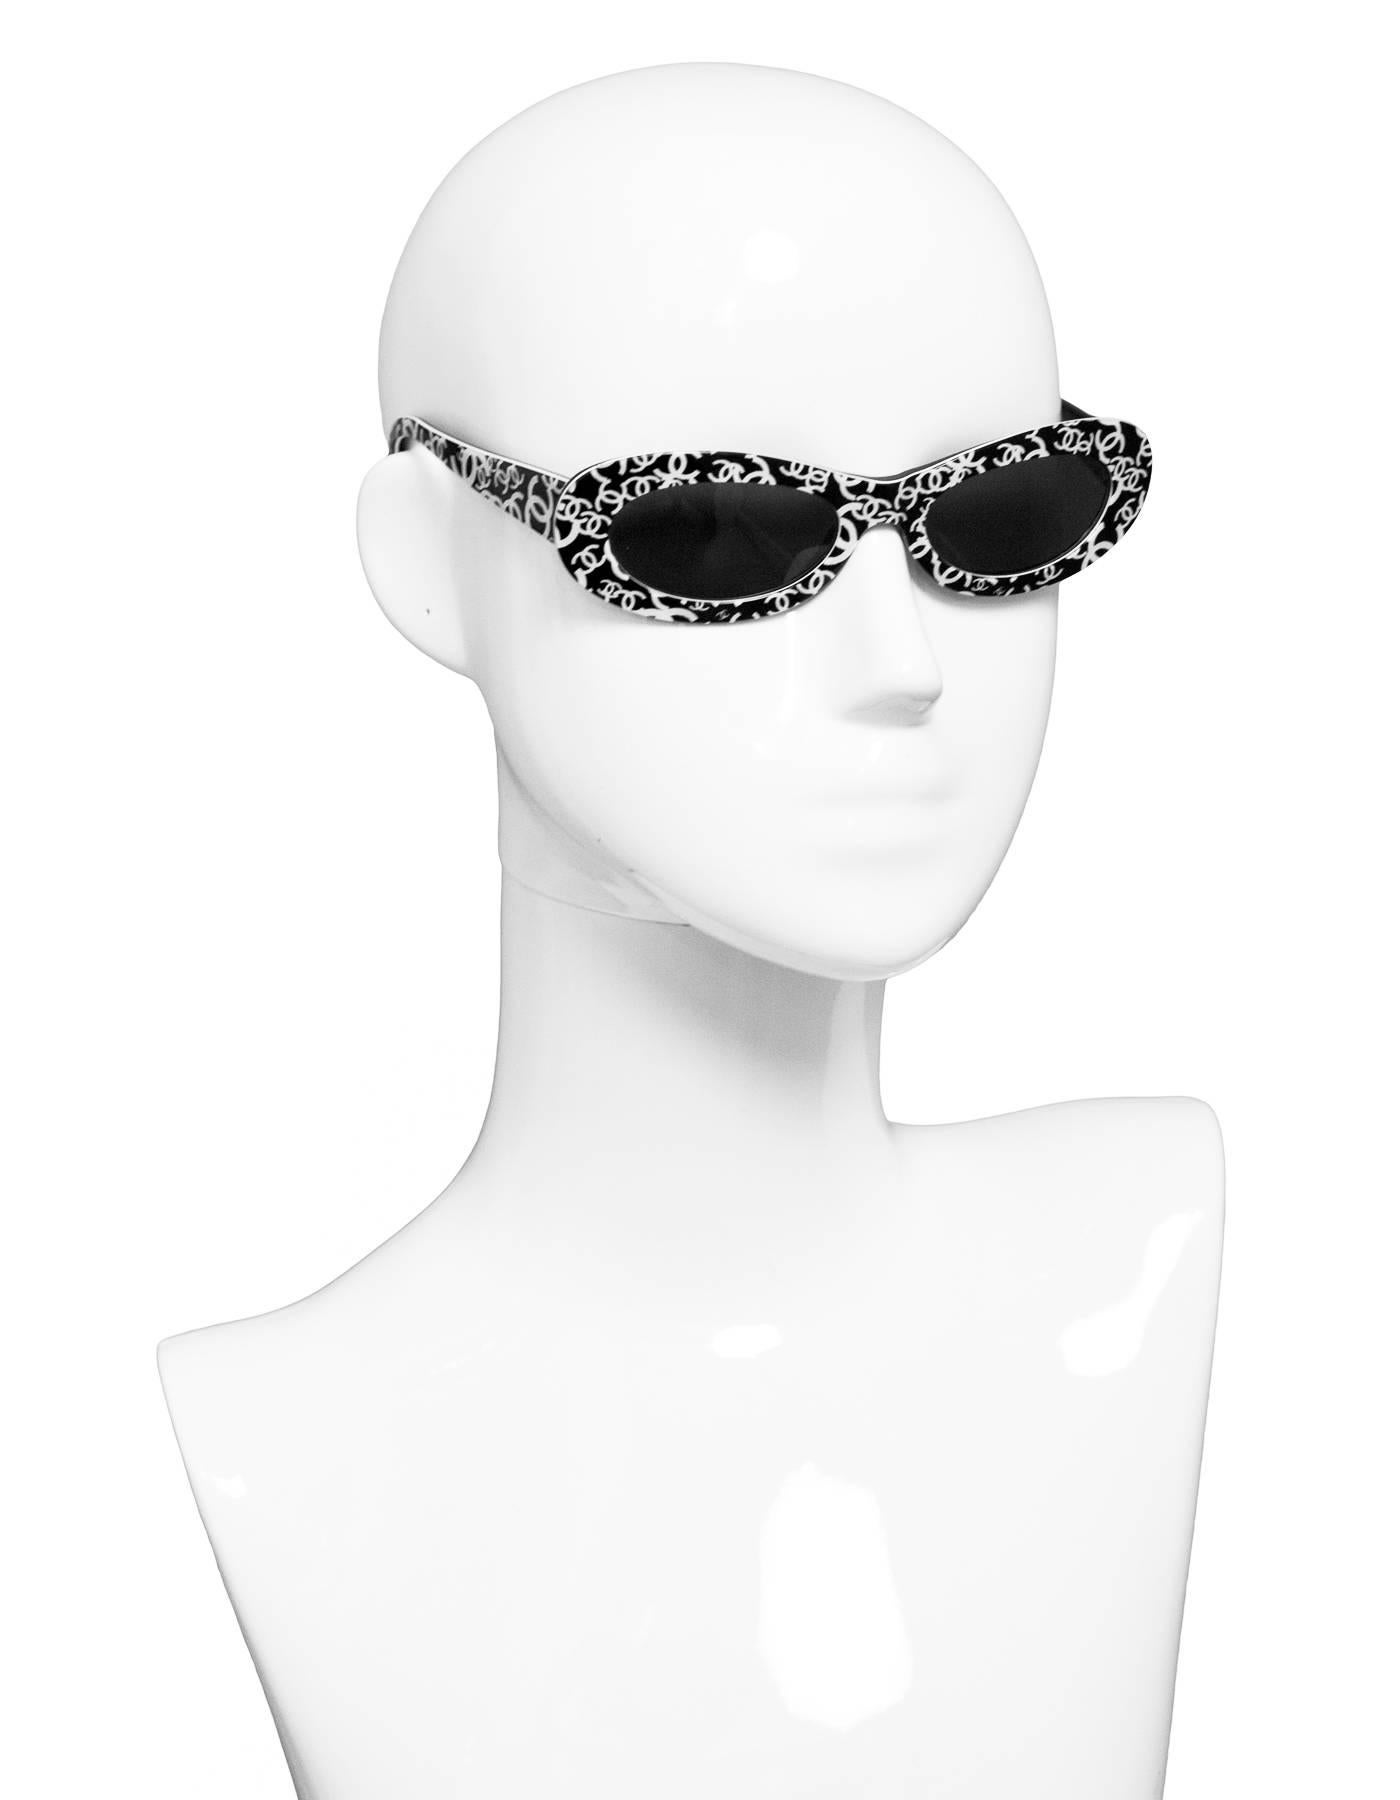 Chanel Vintage Black and Ivory CC Sunglasses

Made In: Italy
Color: Black and ivory
Materials: Resin
Overall Condition: Very good pre-owned vintage condition with the exception of surface marks, misaligned hinges

Measurements: 
Length Across: